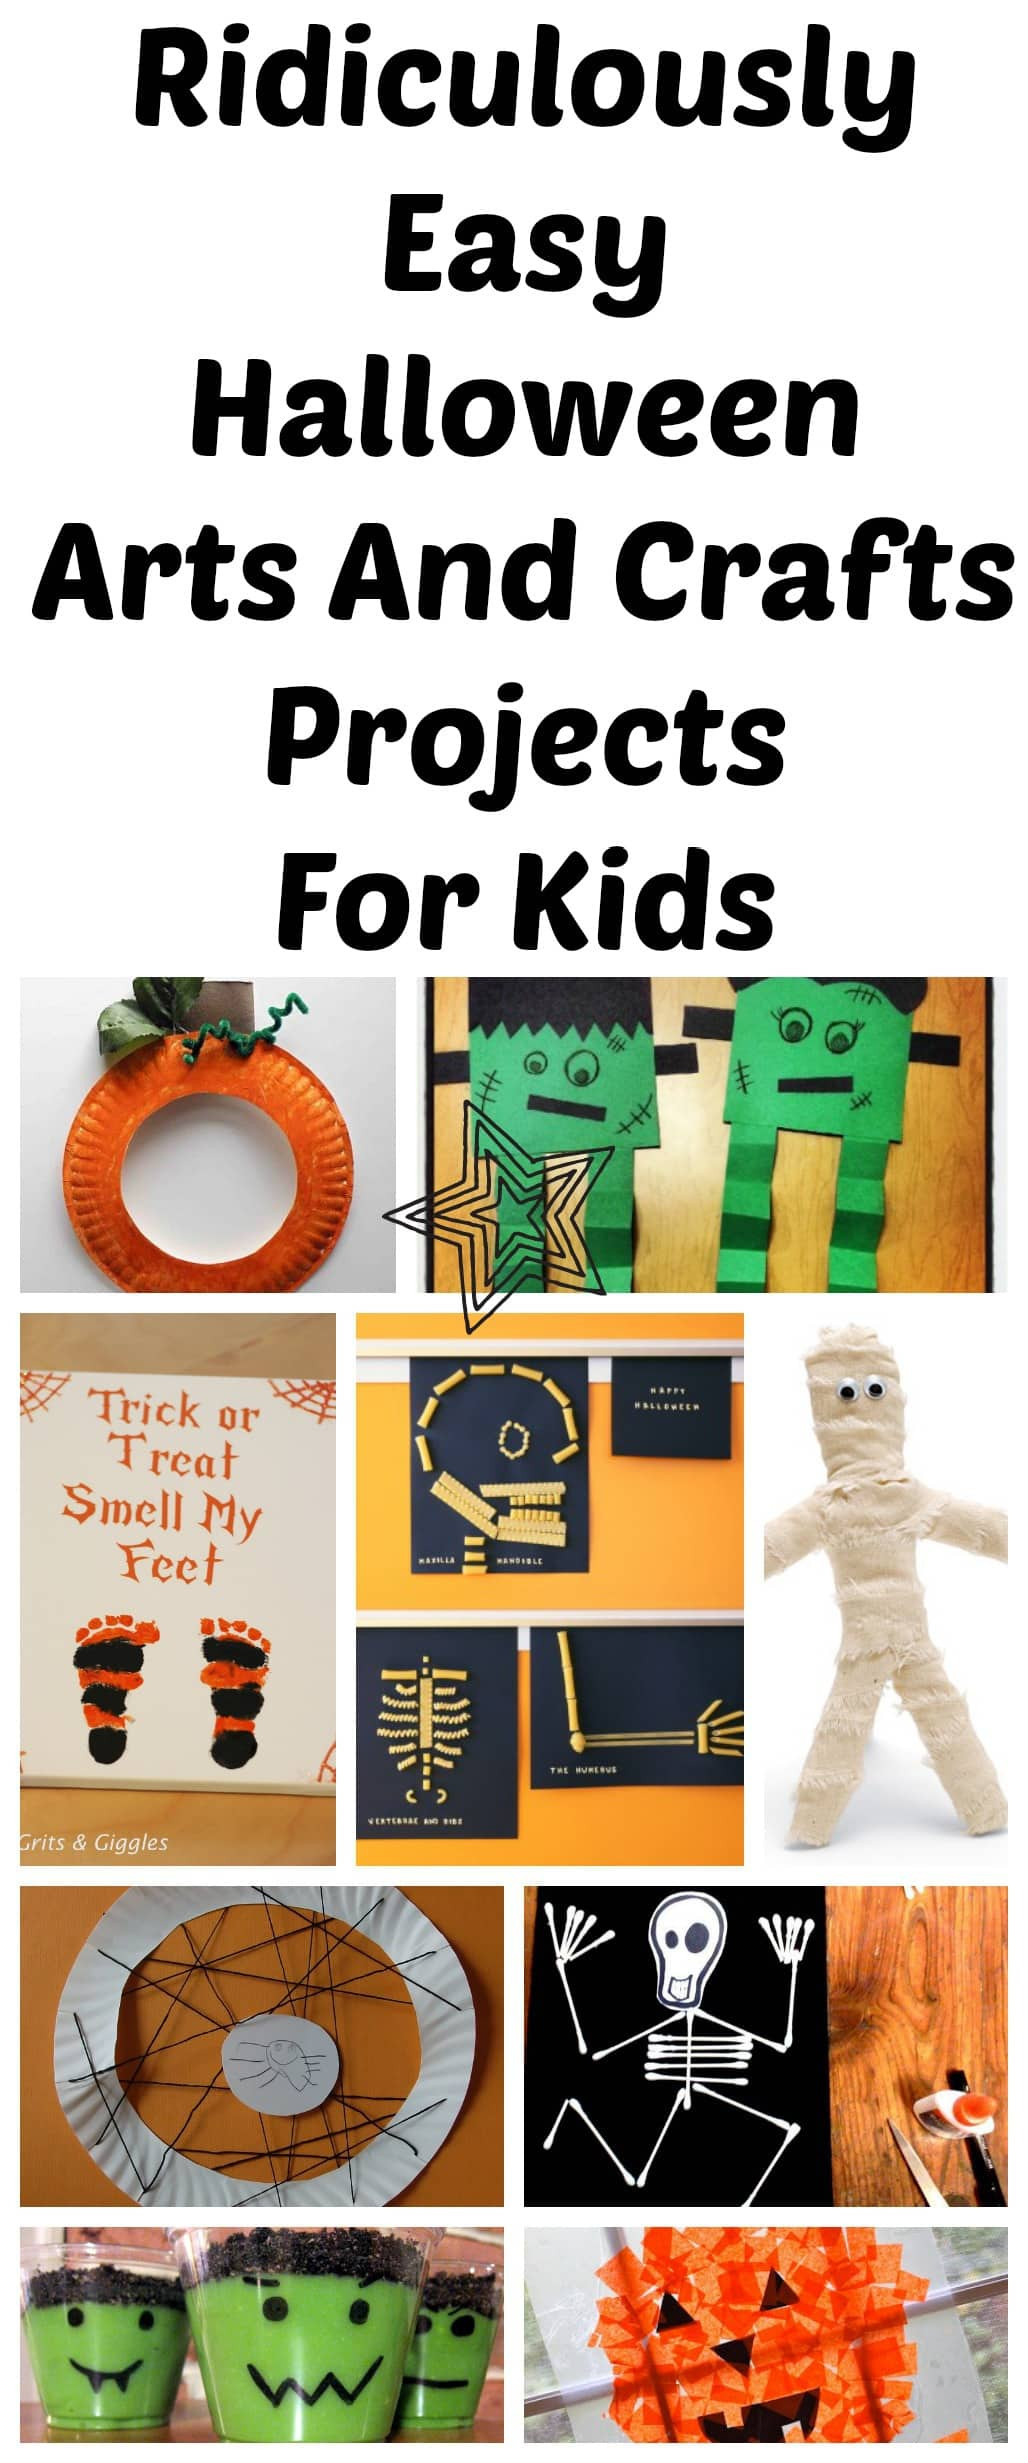 Halloween Craft Ideas Kids
 10 Ridiculously Easy Halloween Arts And Crafts Projects To